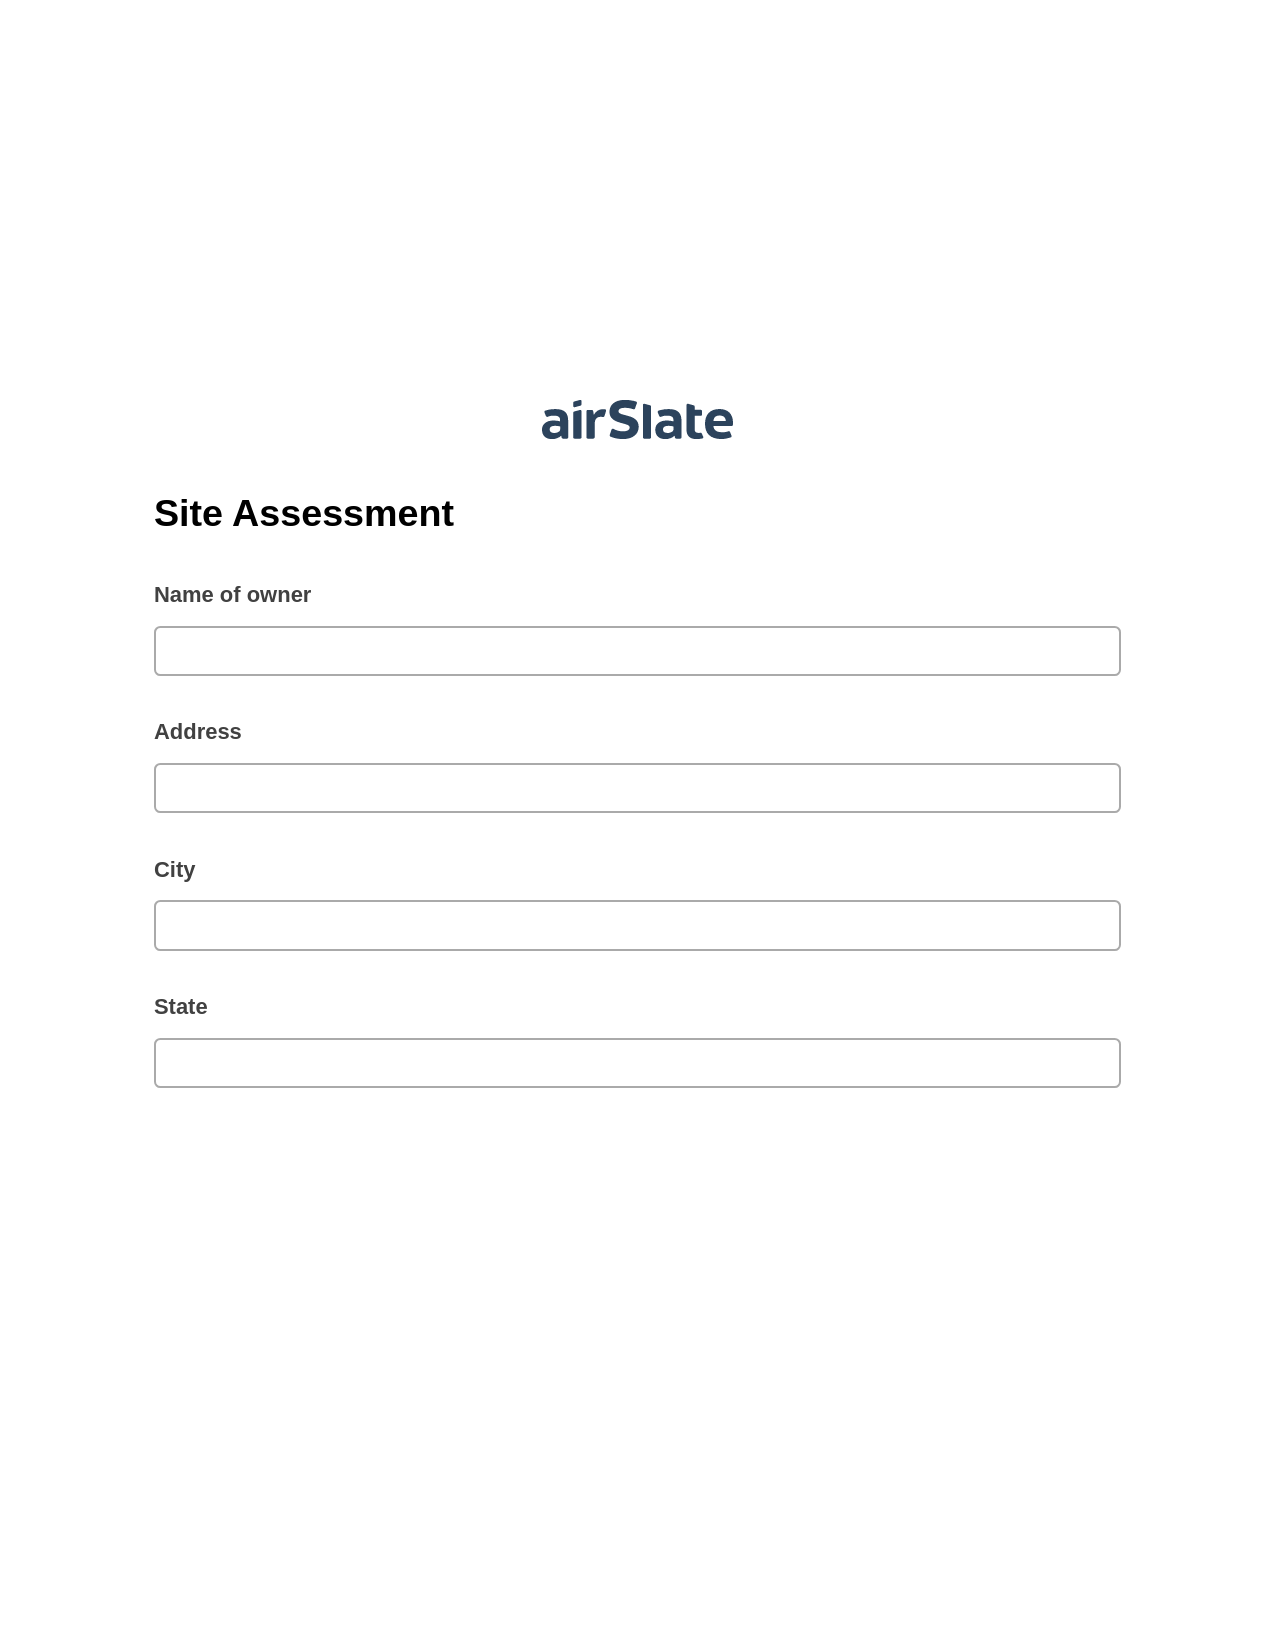 Site Assessment Pre-fill from Salesforce Record Bot, In-person Signing Bot, Export to MySQL Bot